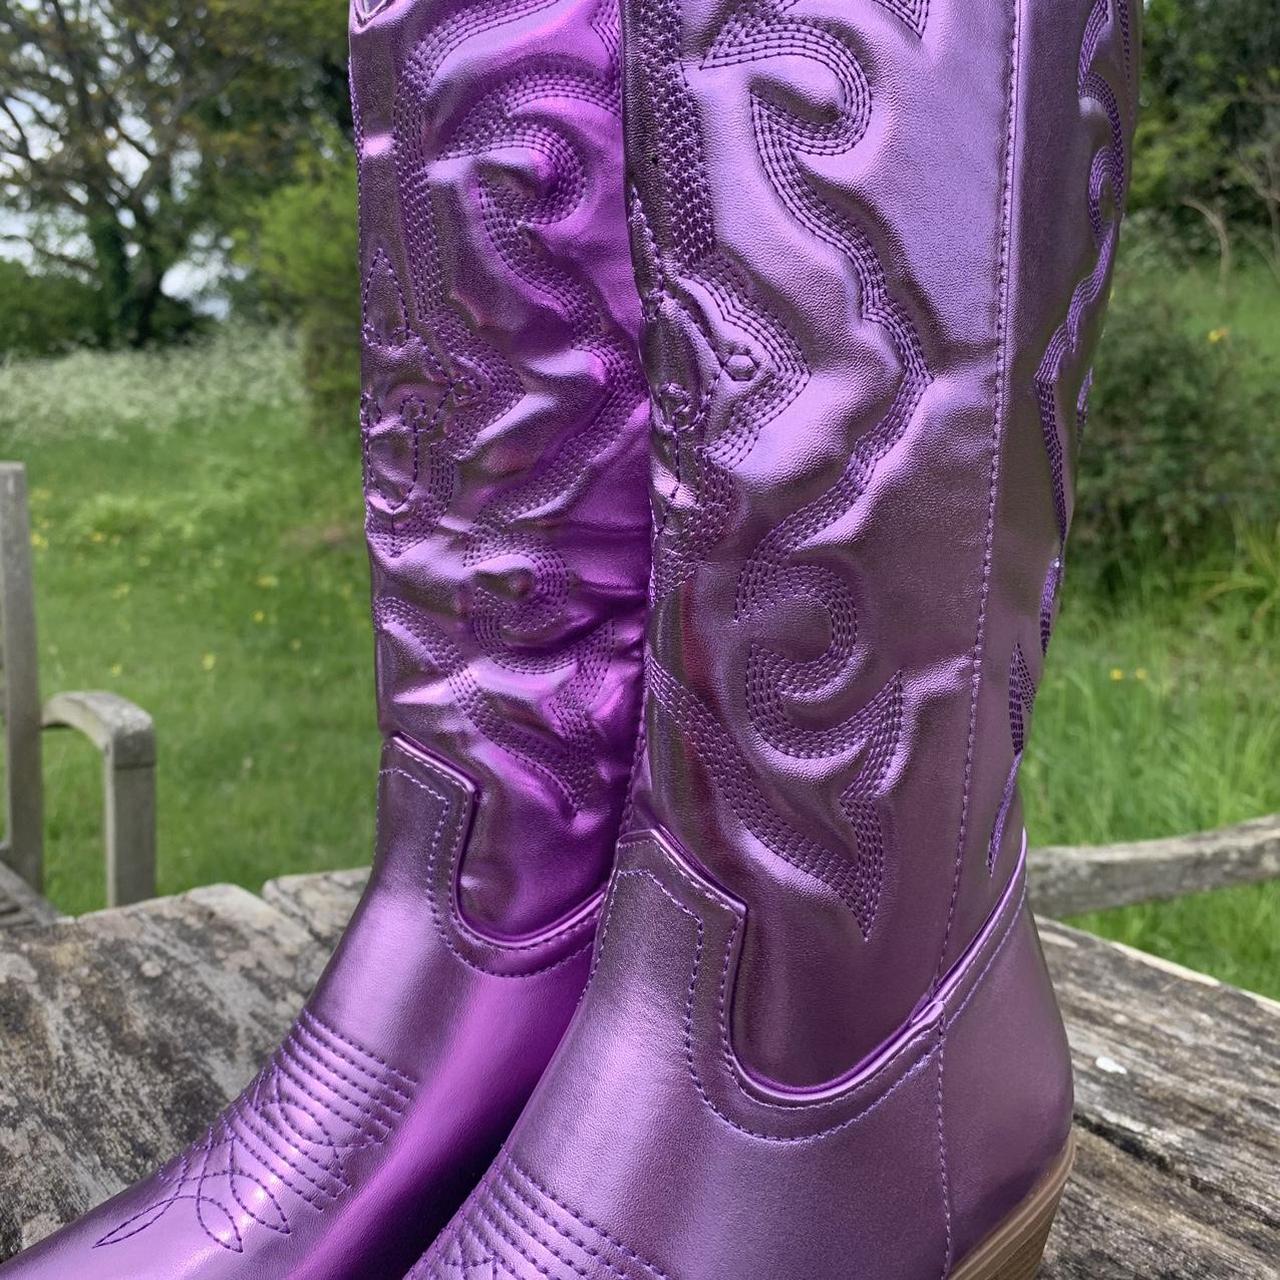 Women's Pink and Purple Boots | Depop